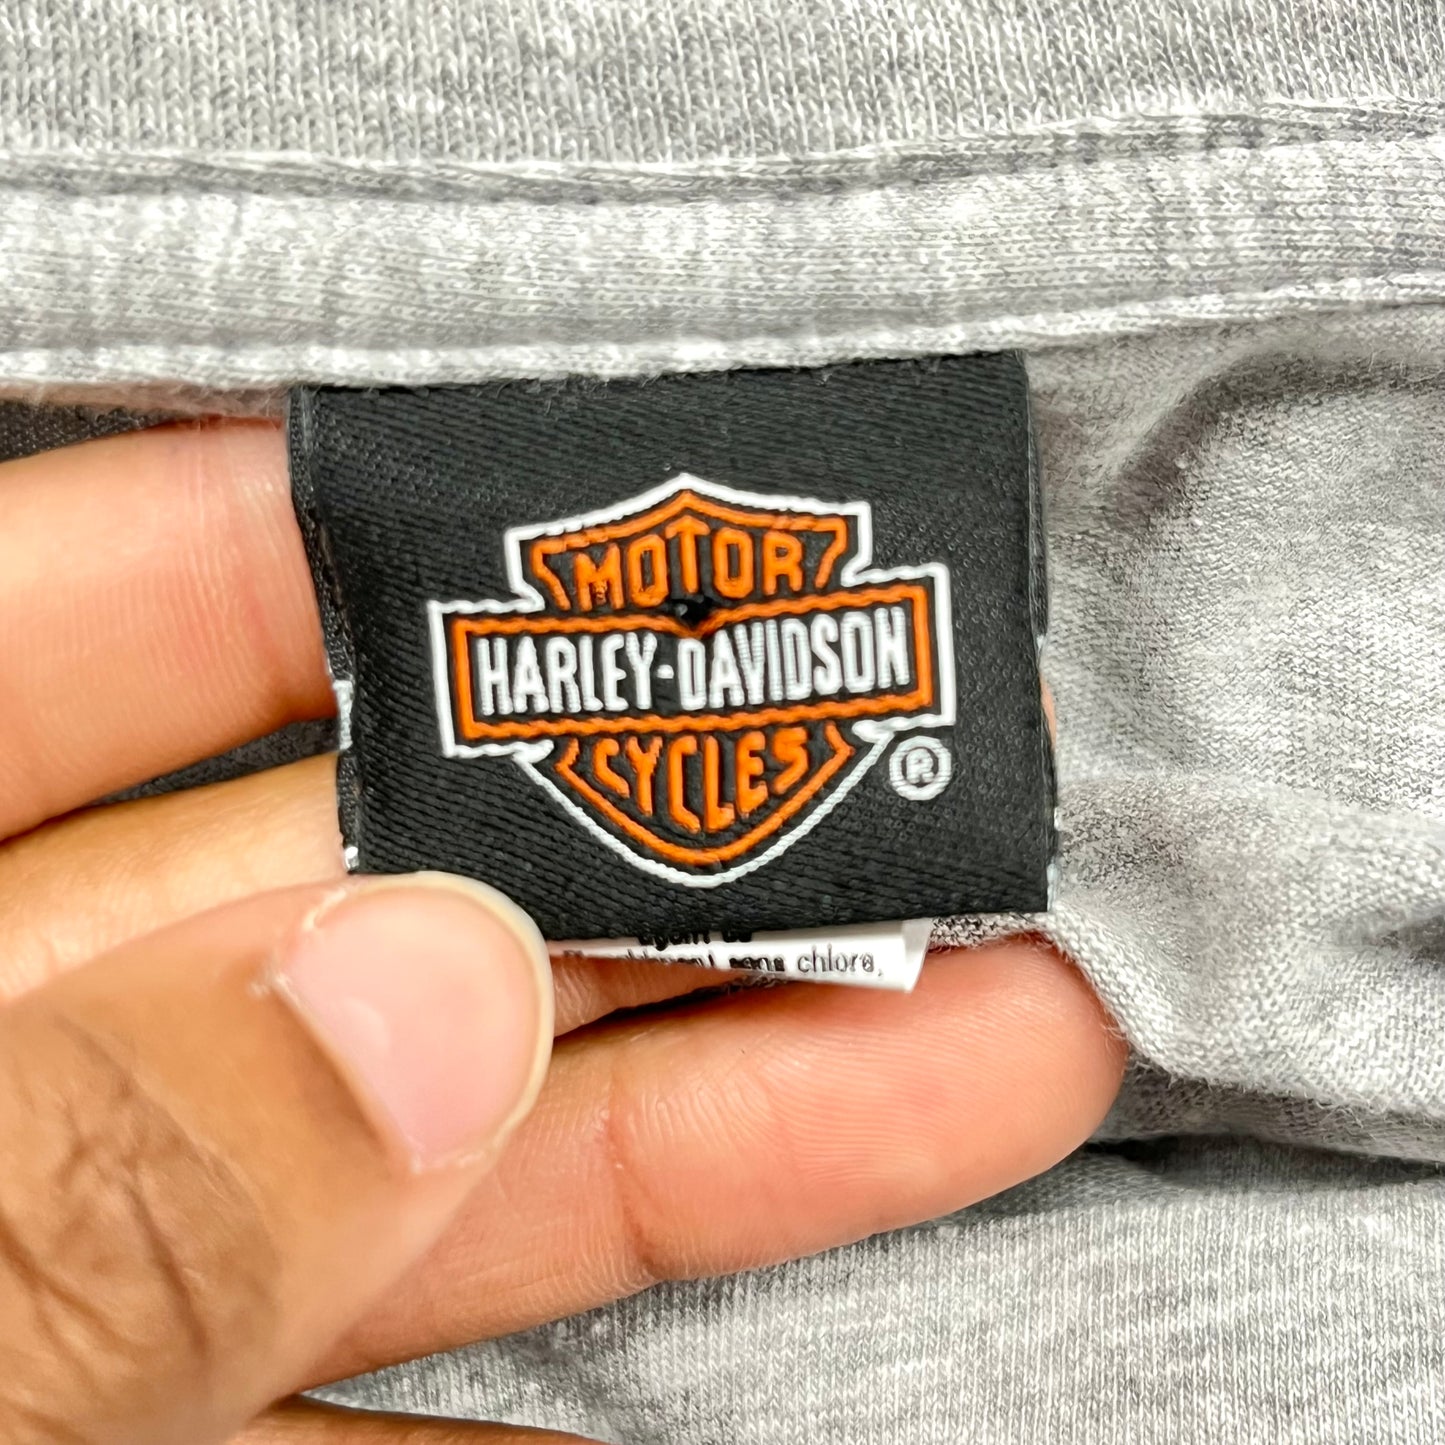 Top Short Sleeve By Harley Davidson  Size: M